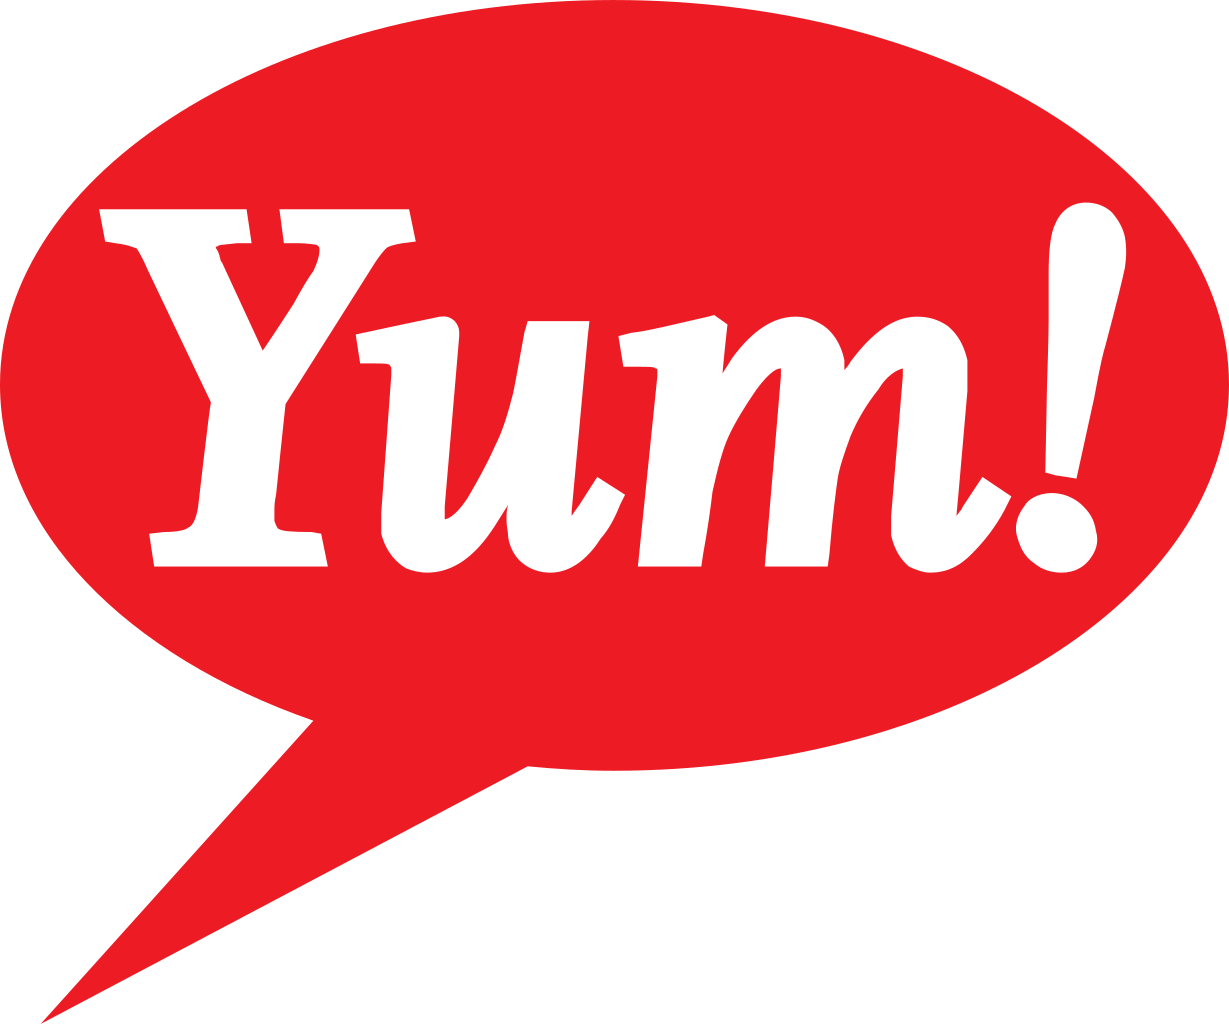 YUM! BRANDS 2018 GLOBAL CITIZENSHIP & SUSTAINABILITY PROGRESS UPDATE HIGHLIGHTS COMPANY'S COMMITMENT TO SOCIALLY RESPONSIBLE GROWTH